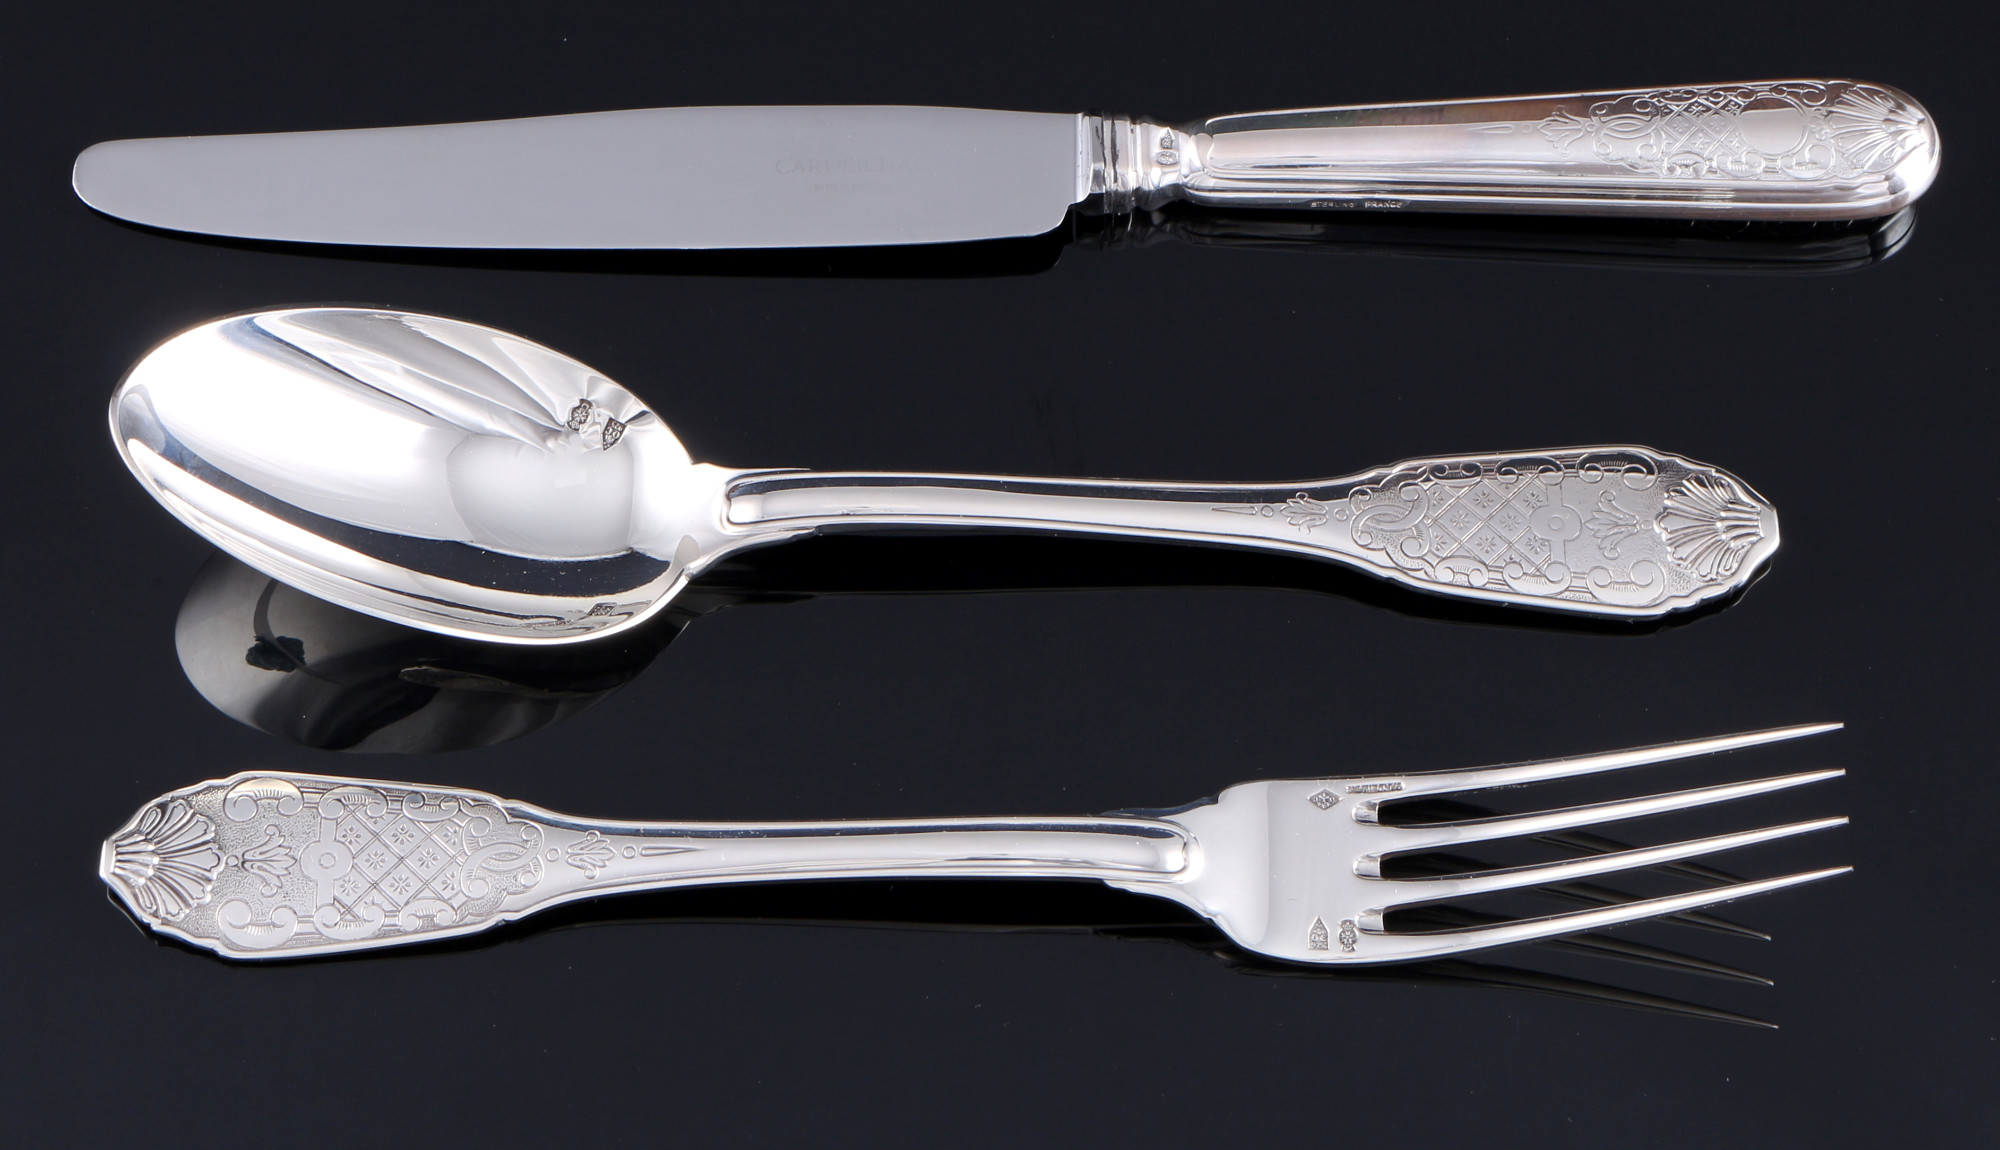 Christofle Royal Cisele 925 sterling silver cutlery for 6 persons, Silber Besteck für 6 Personen, - Image 2 of 5